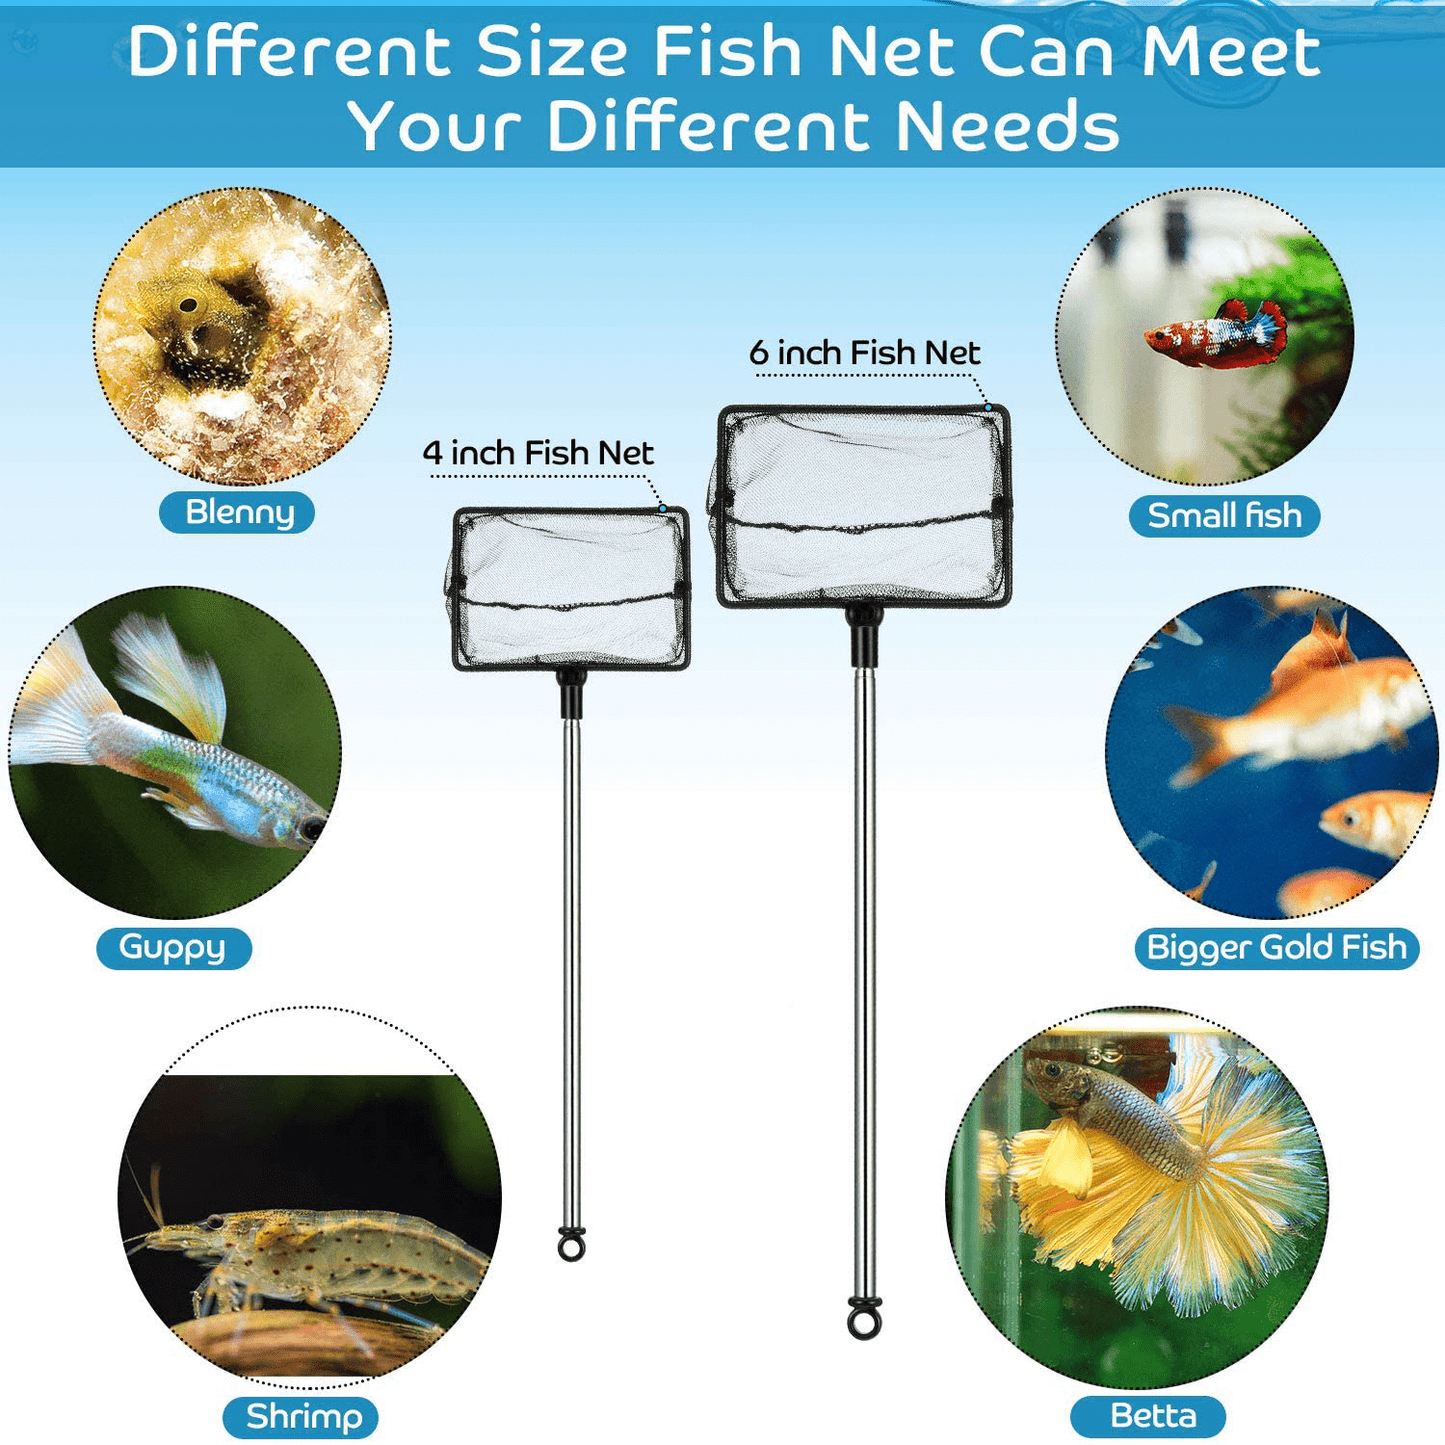 2 Pieces Mesh Fish Tank Net Aquarium Fish Net 4 Inch and 6 Inch Stainless Steel Fish Net with Extendable 12.5-27.5 Inch Long Handle Fish Catch Nets Fish Tank Aquarium Accessories